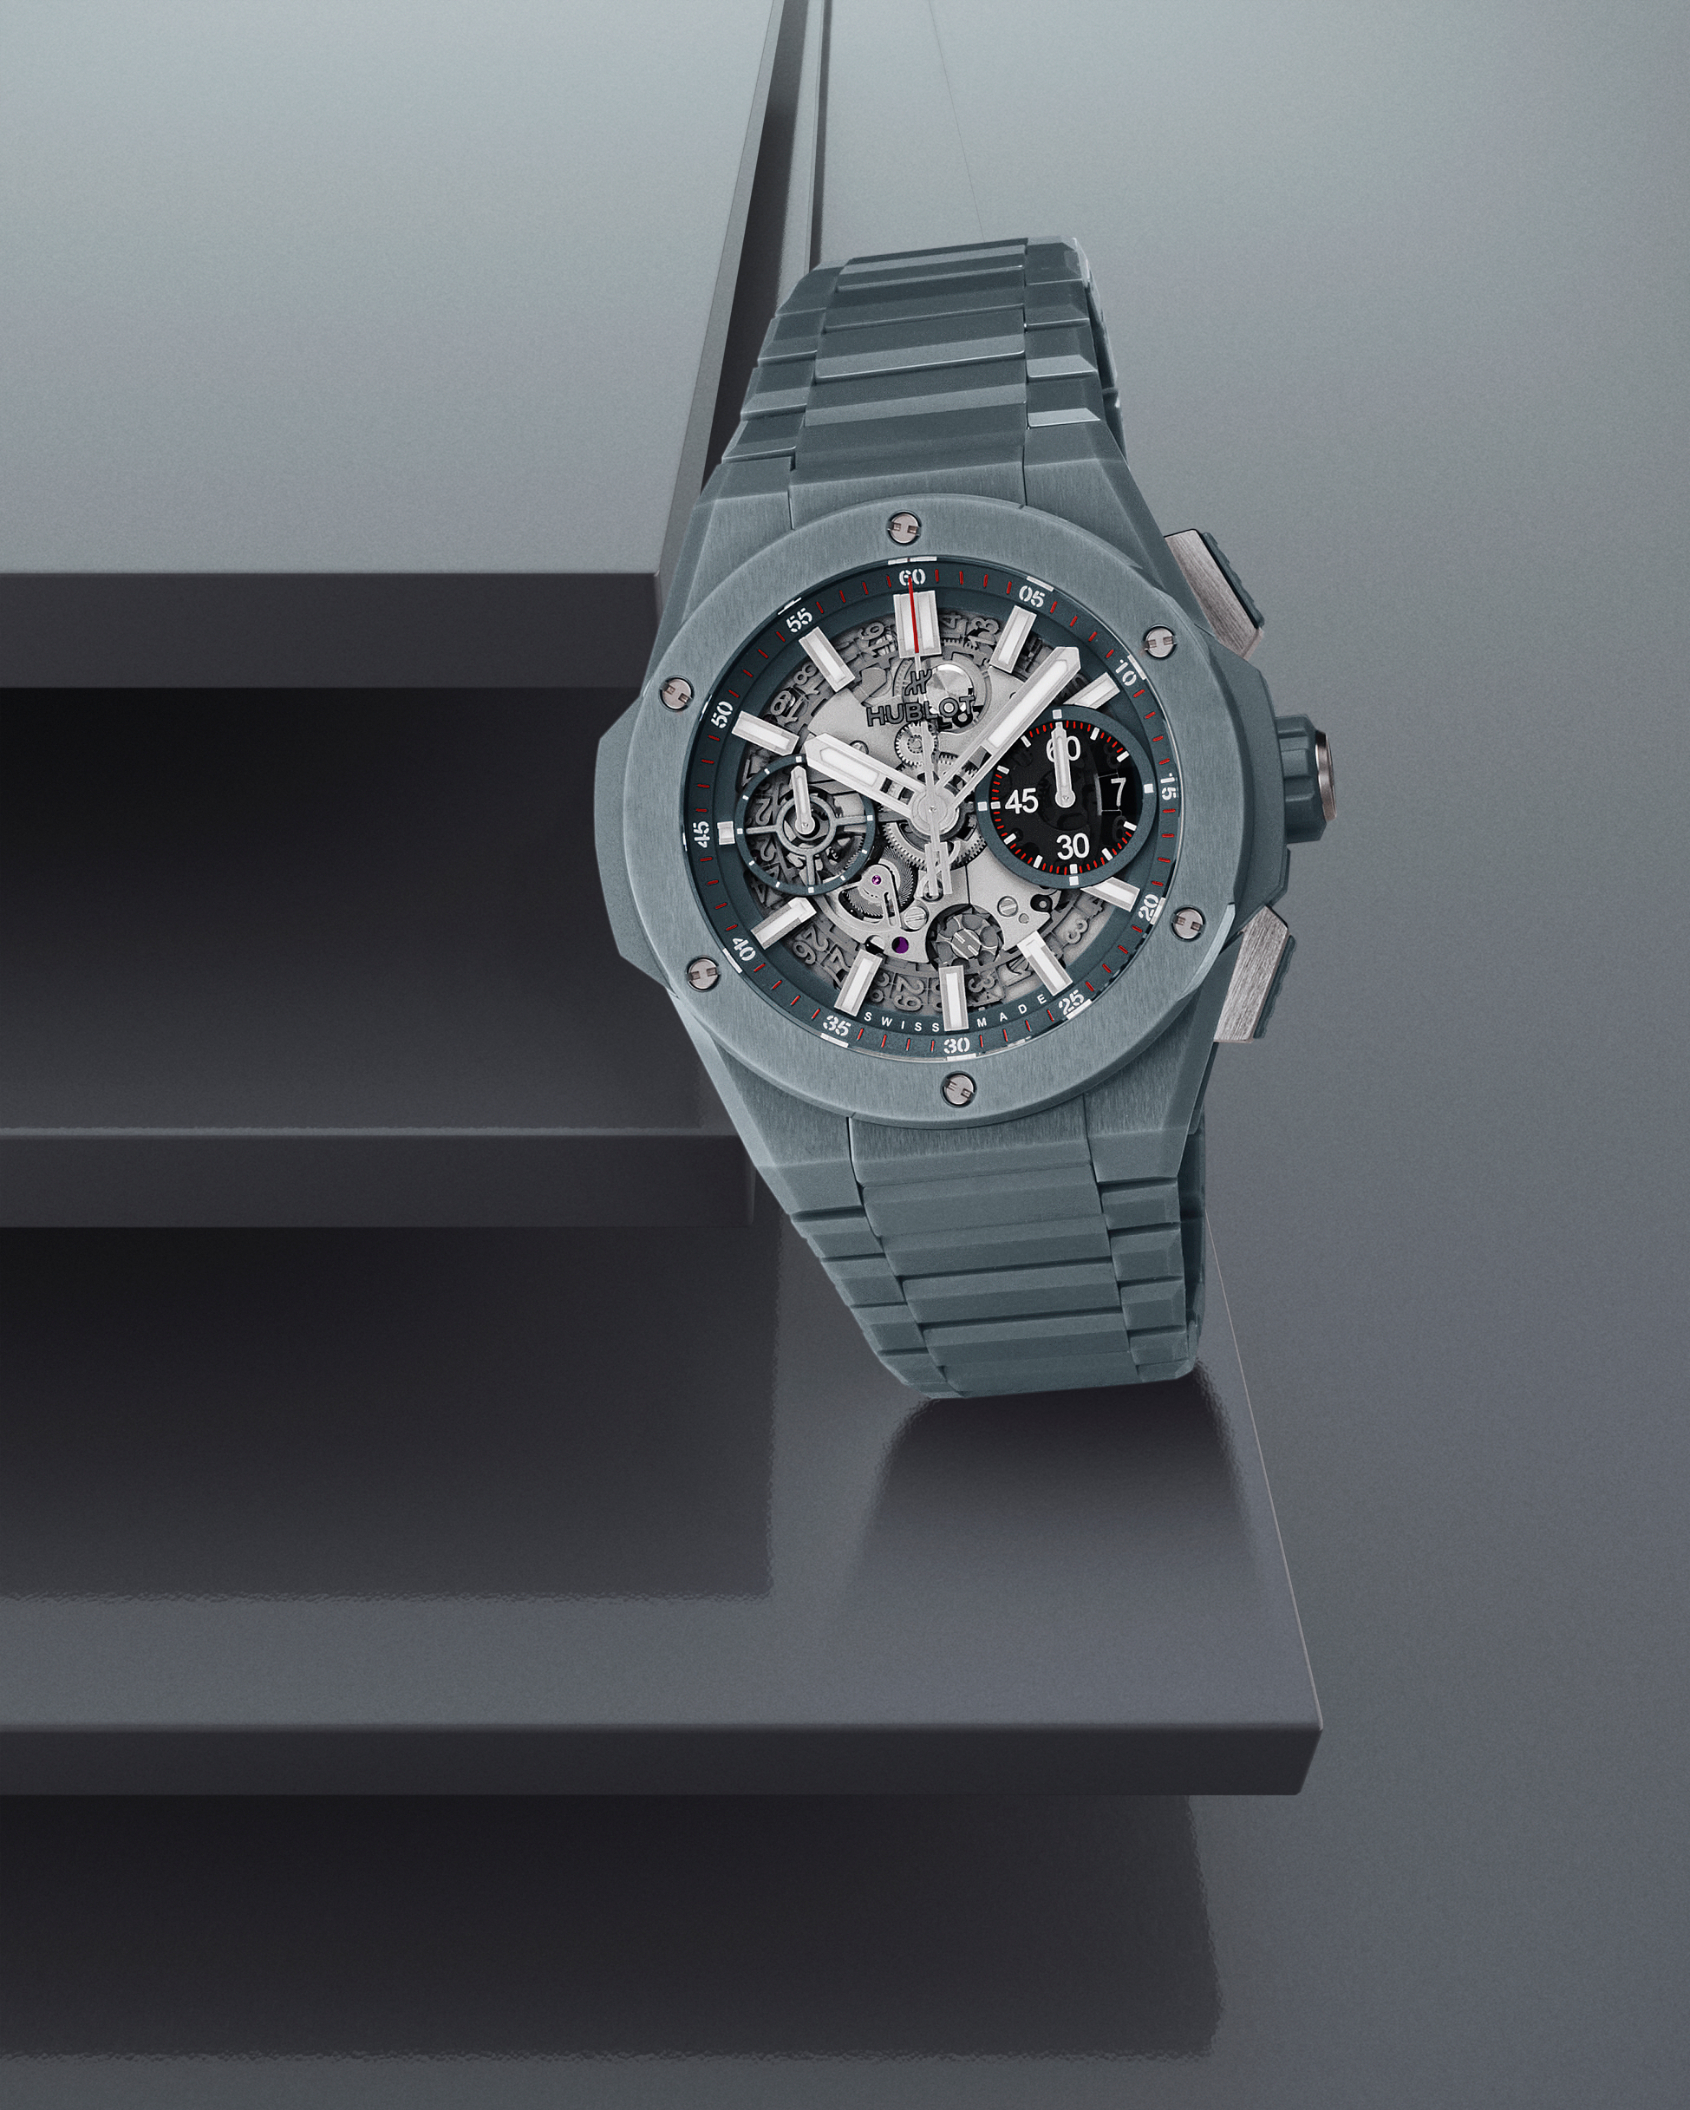 INTRODUCING: With this razor-sharp trio, Hublot once again move the ...